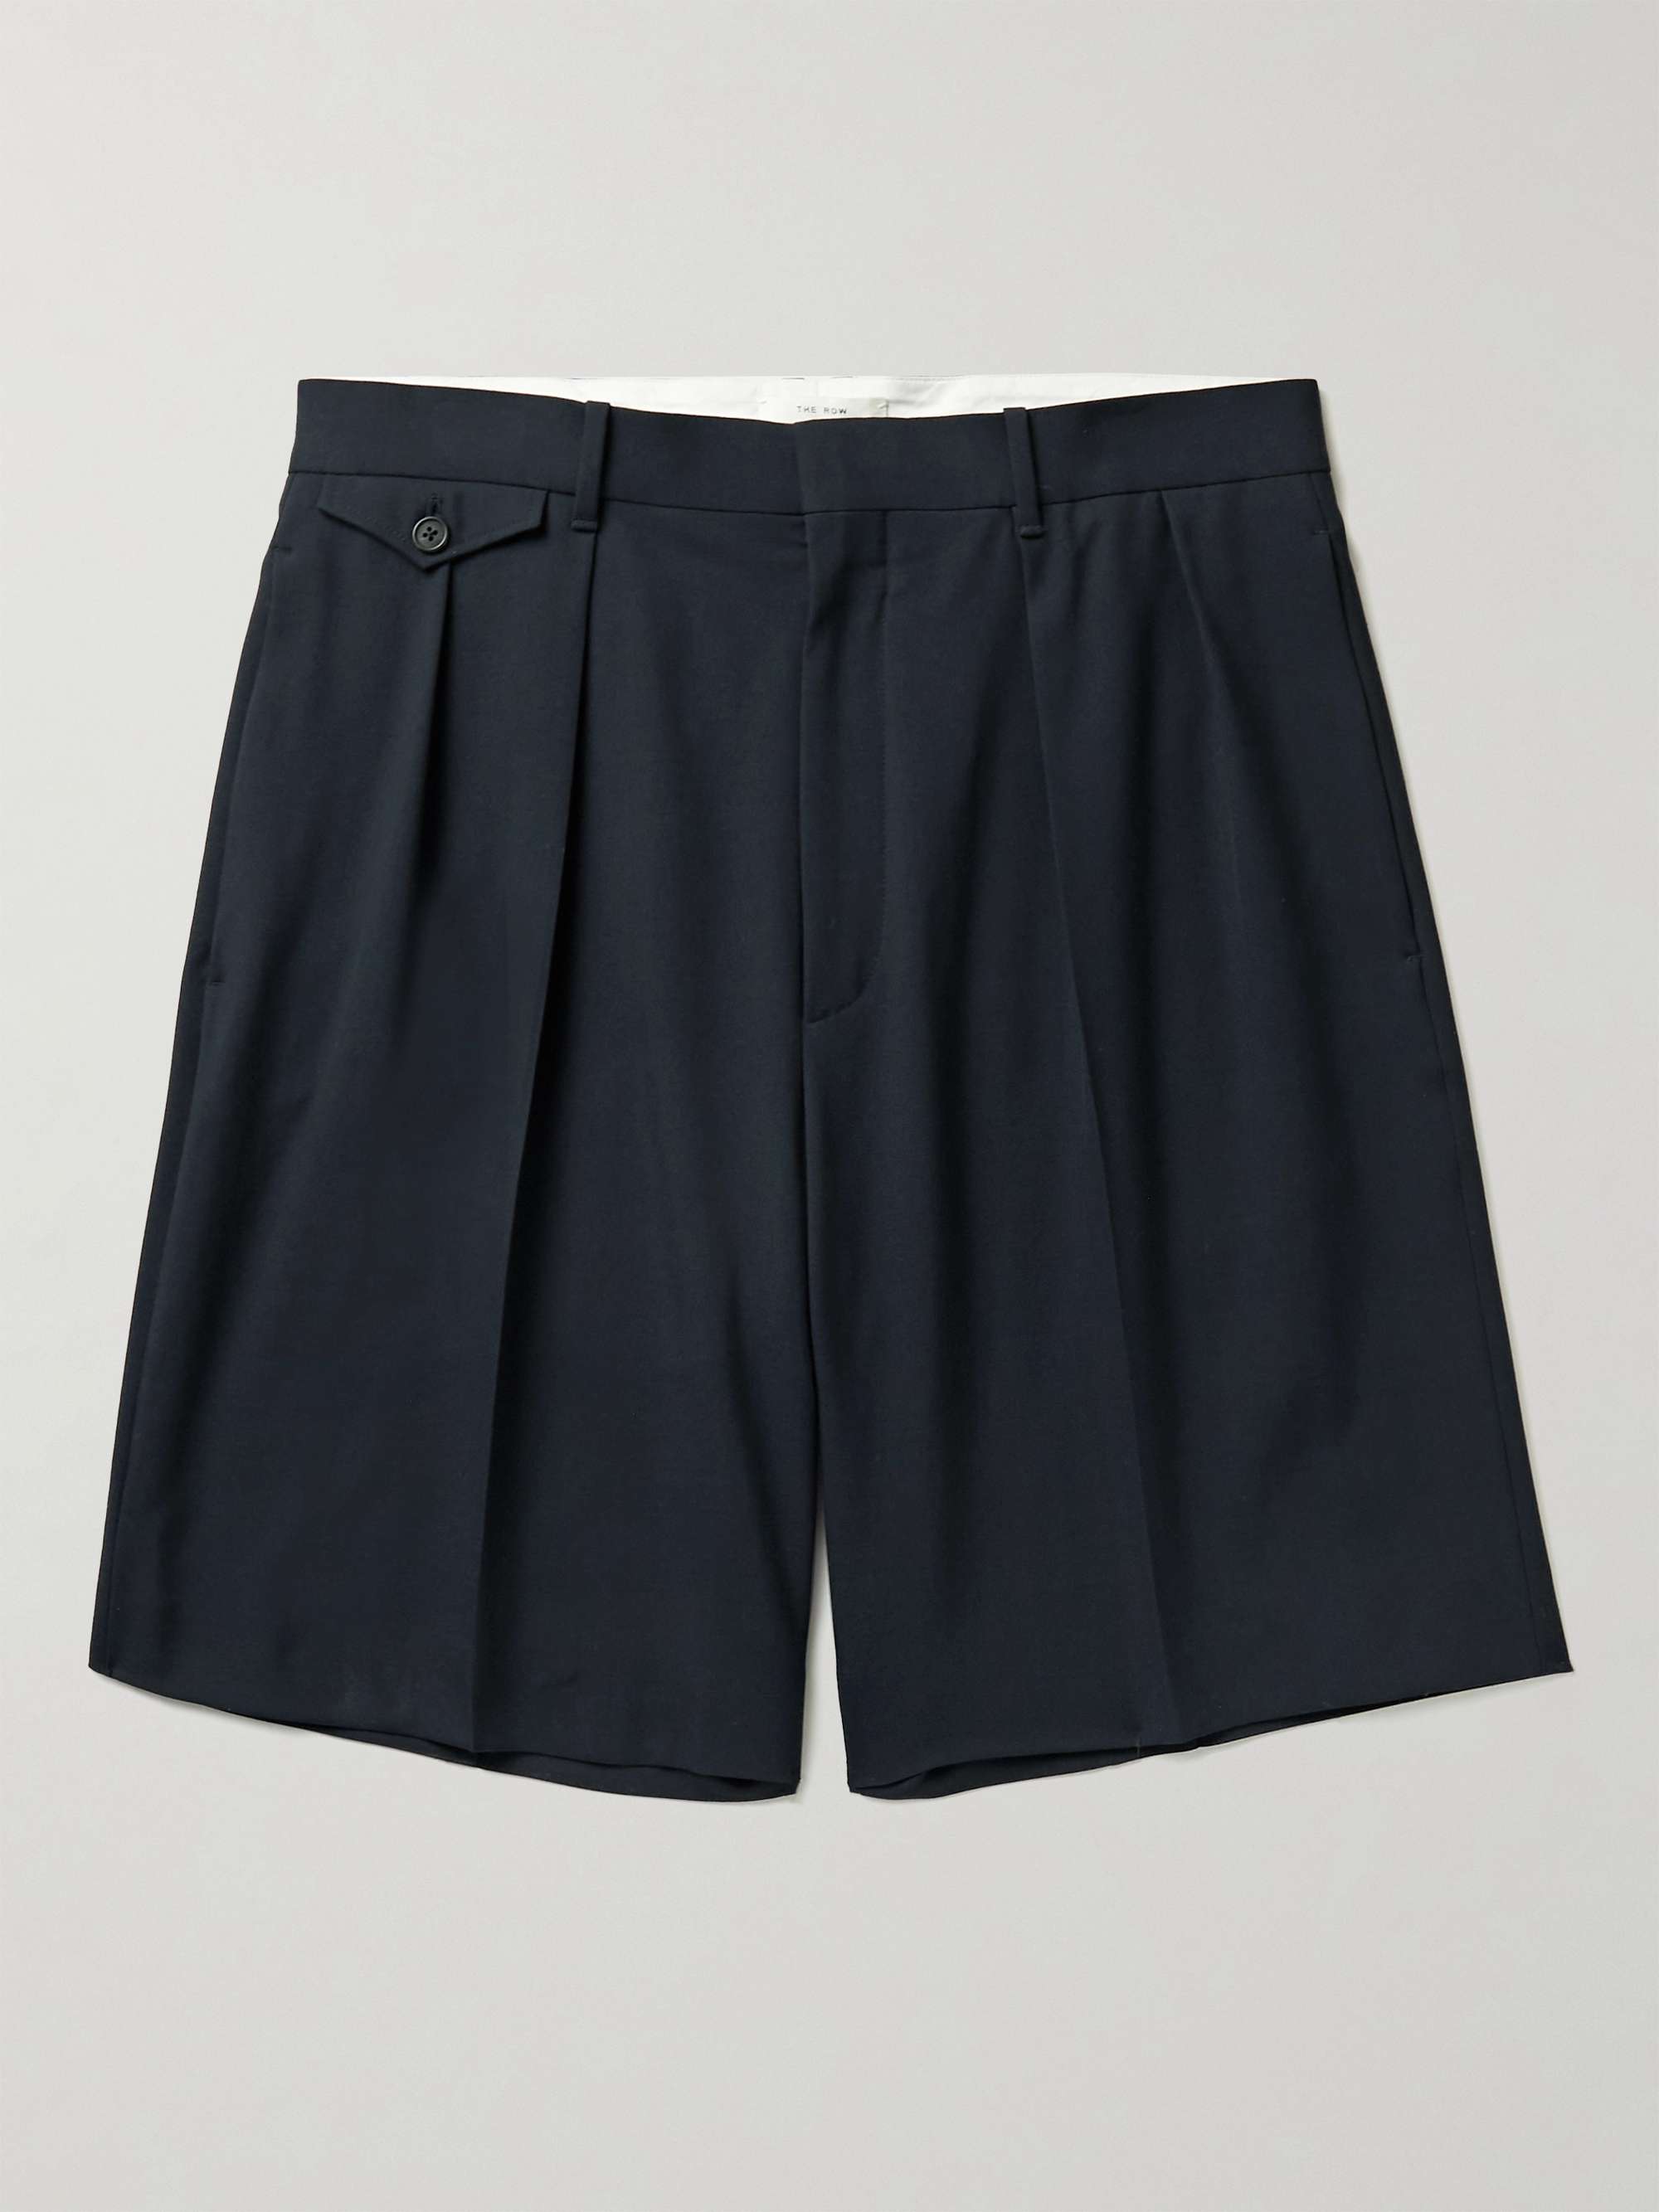 for Men Mens Clothing Shorts Casual shorts The Row Cello Pleated Wool-gabardine Shorts in Dark Navy Blue 